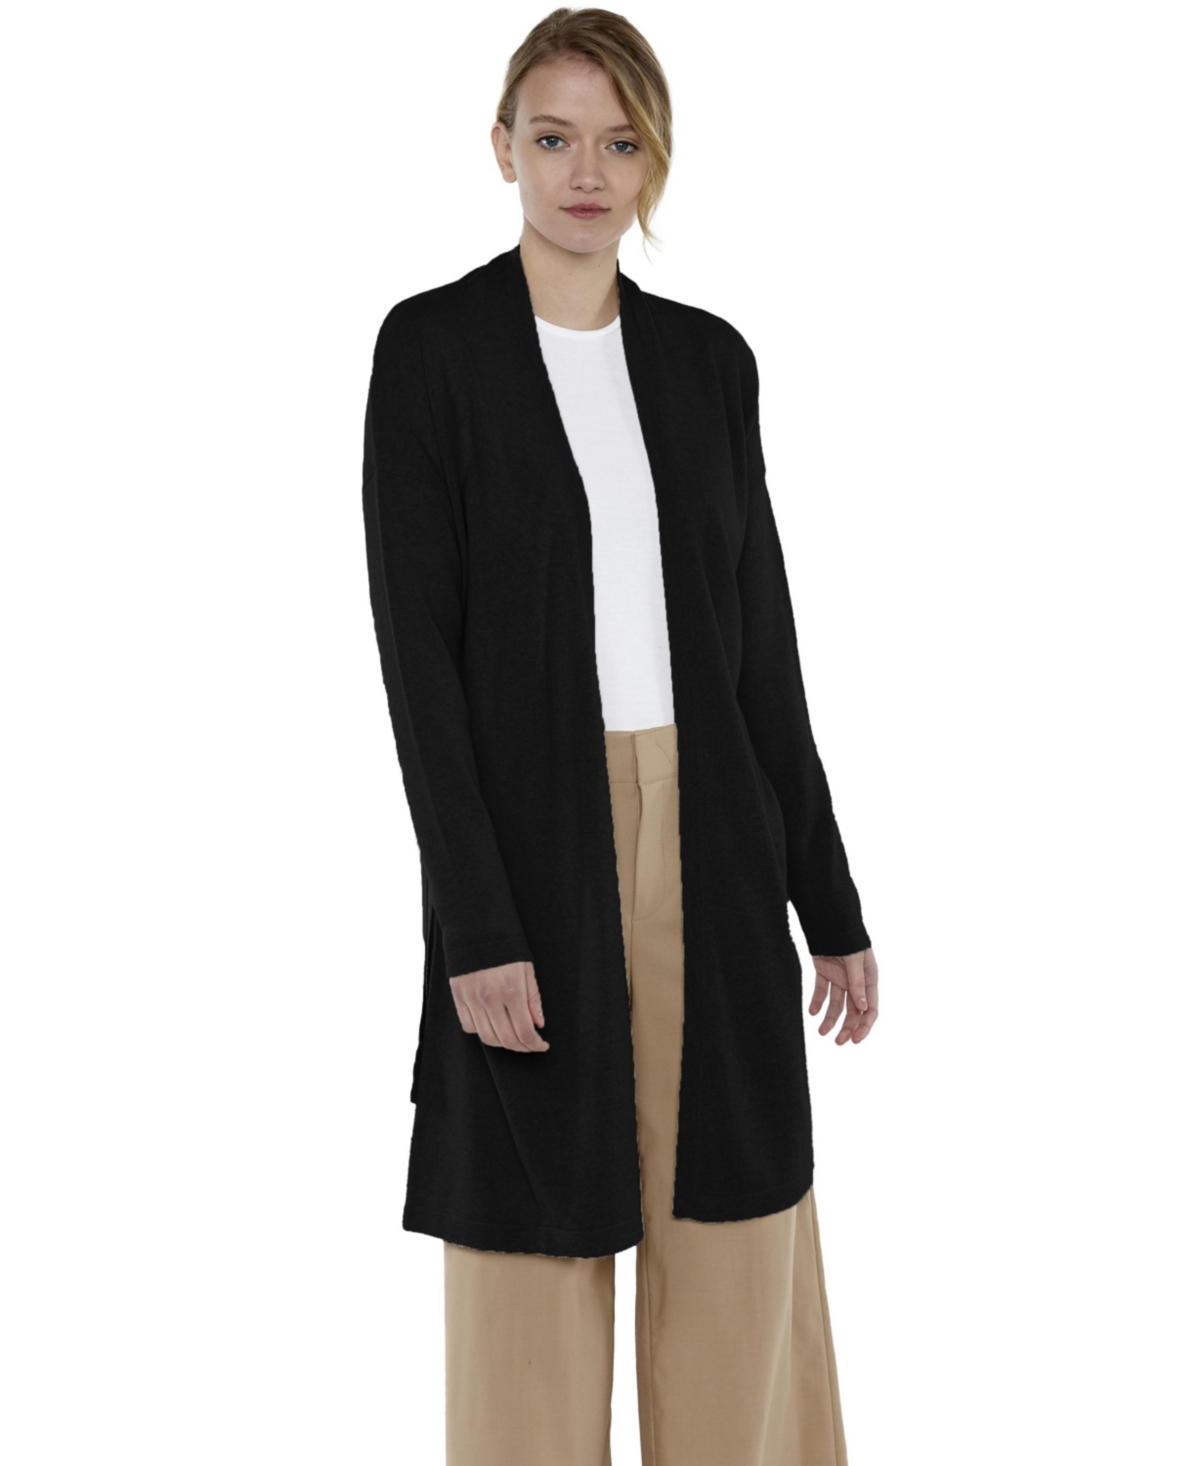 Women's 100% Pure Cashmere Long Sleeve Belted Lux Wrap Cardigan Robe Sweater - Black